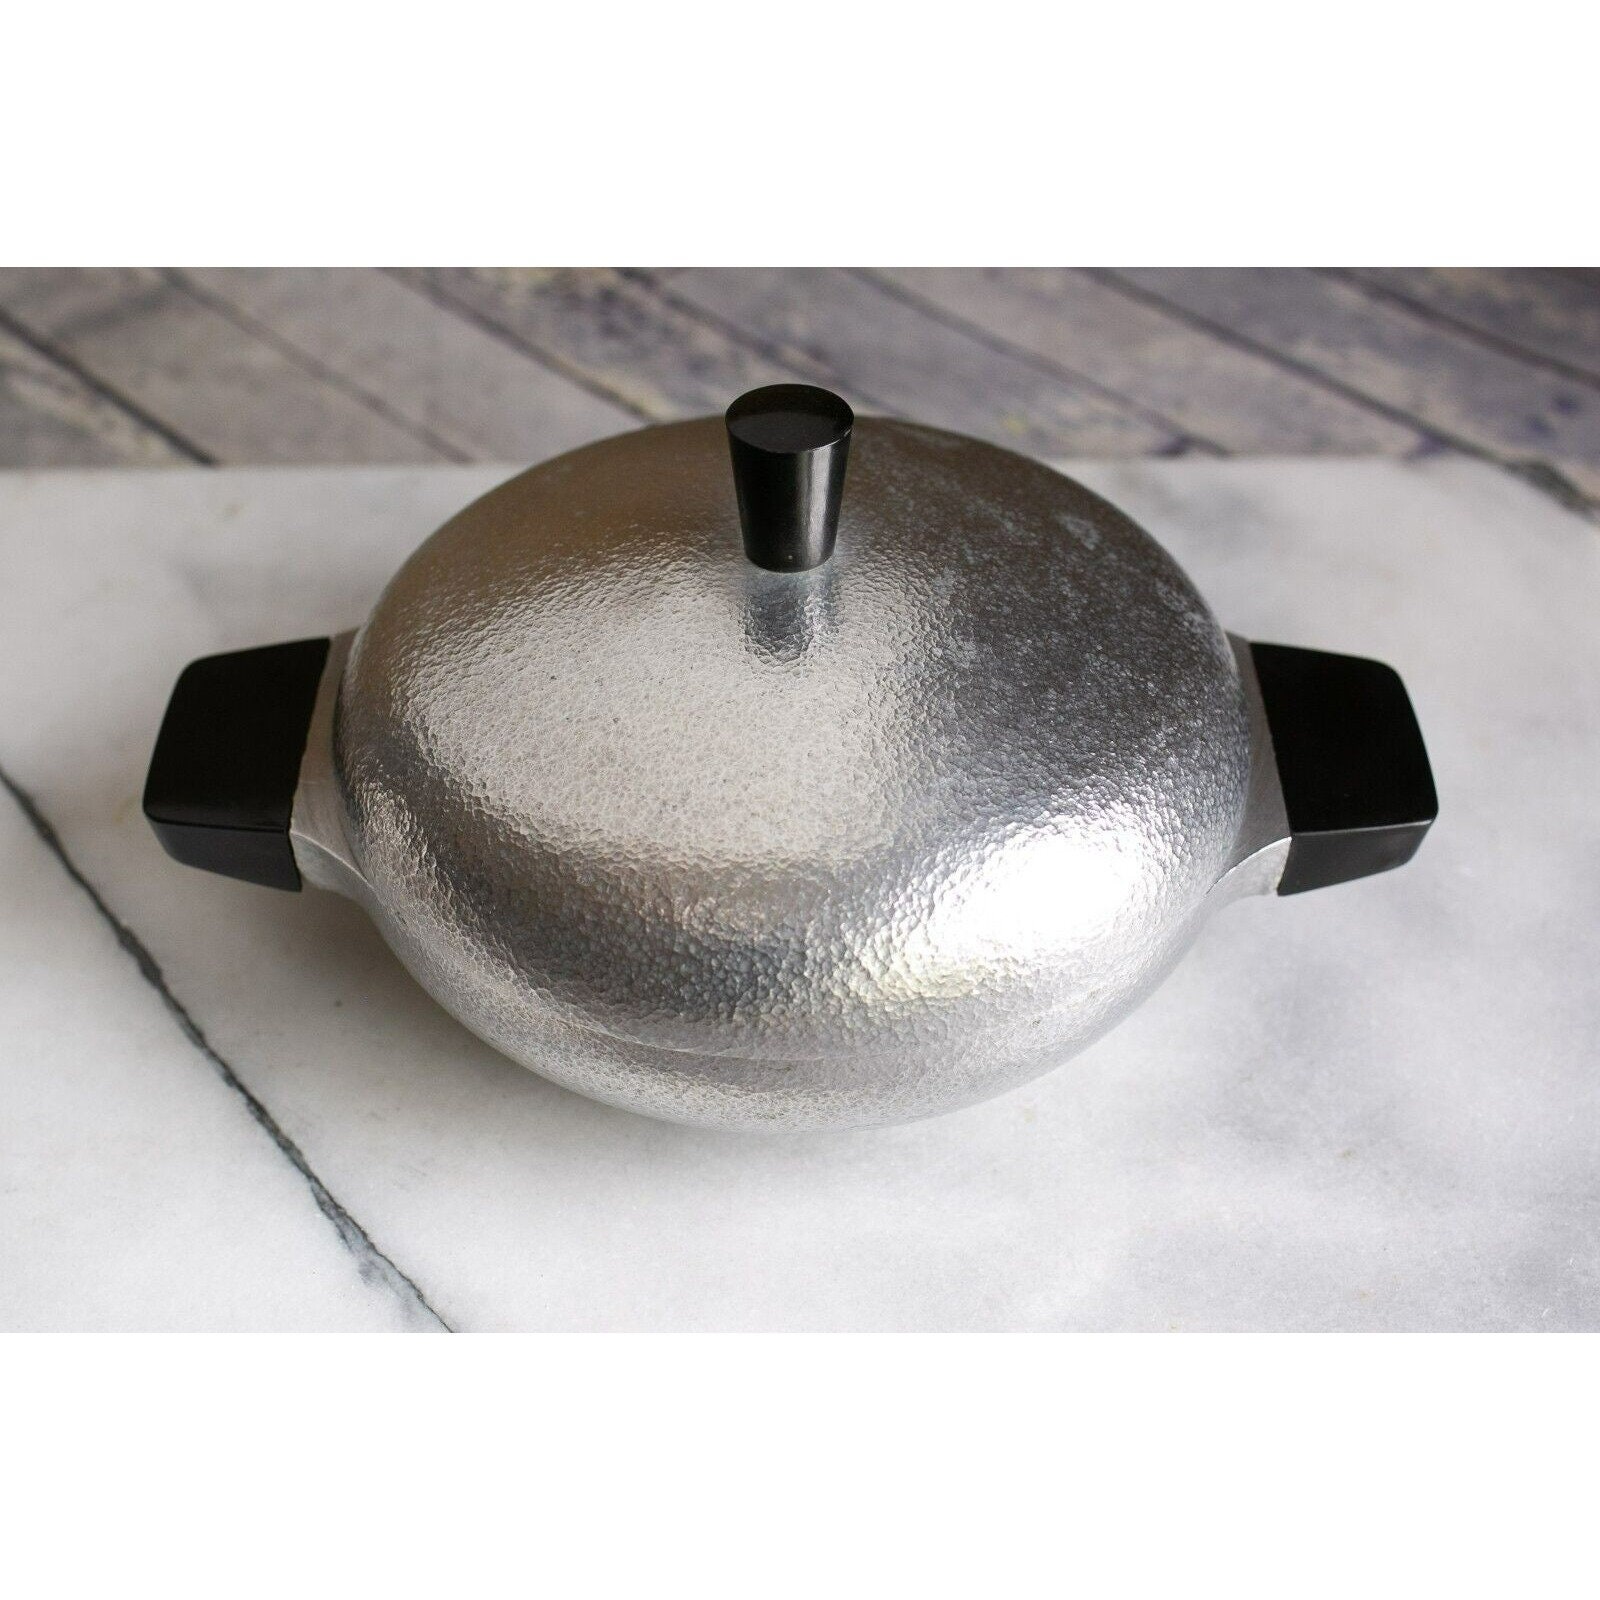 Club Hammered Aluminum Divided Frying Pan 8.75 in. wide